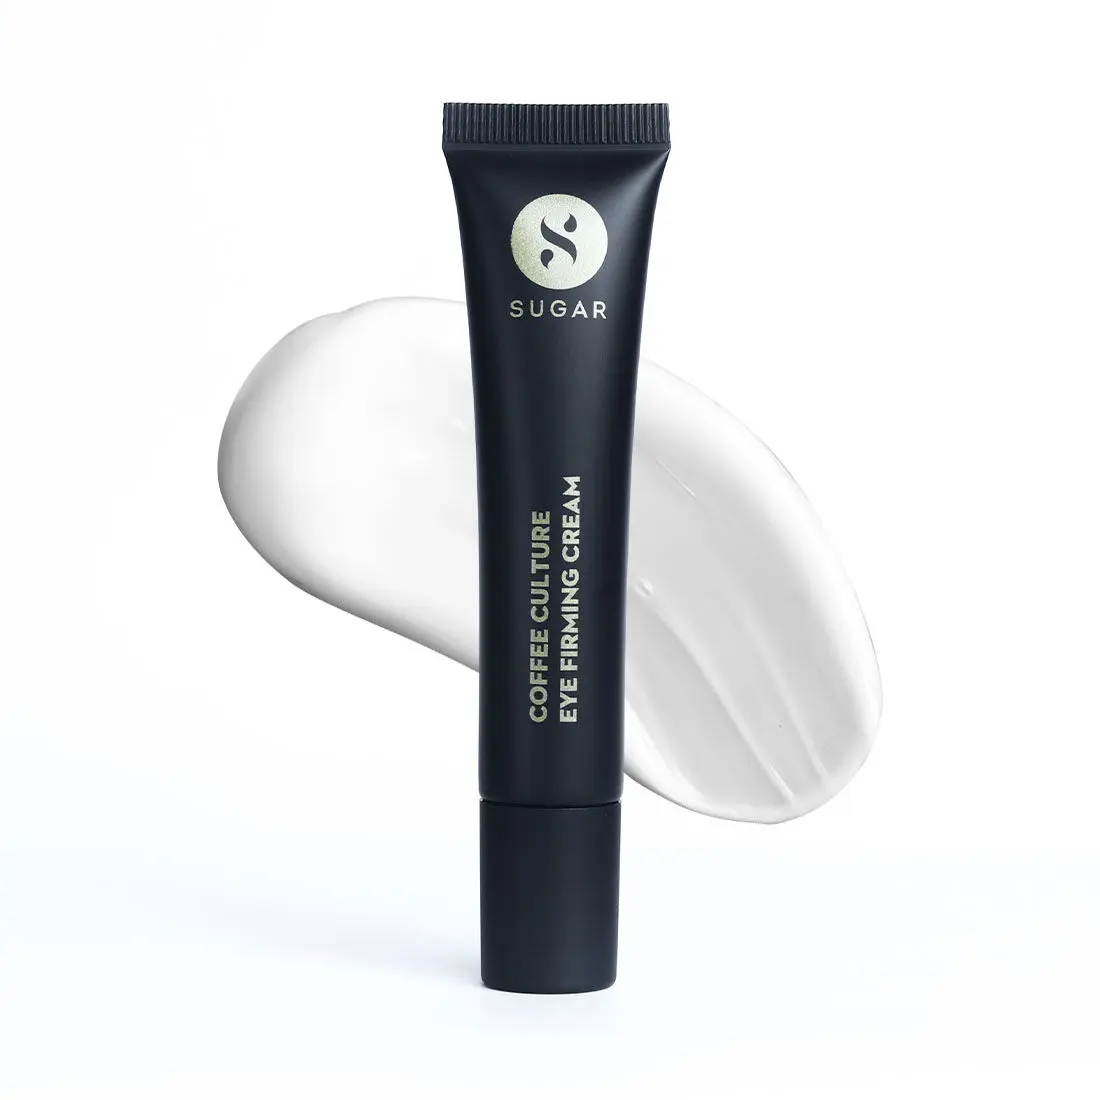 SUGAR Cosmetics - Coffee Culture - Eye Firming Cream with Coffee Extracts - Under-Eye Cream to Relieve Puffiness and Dark Circles